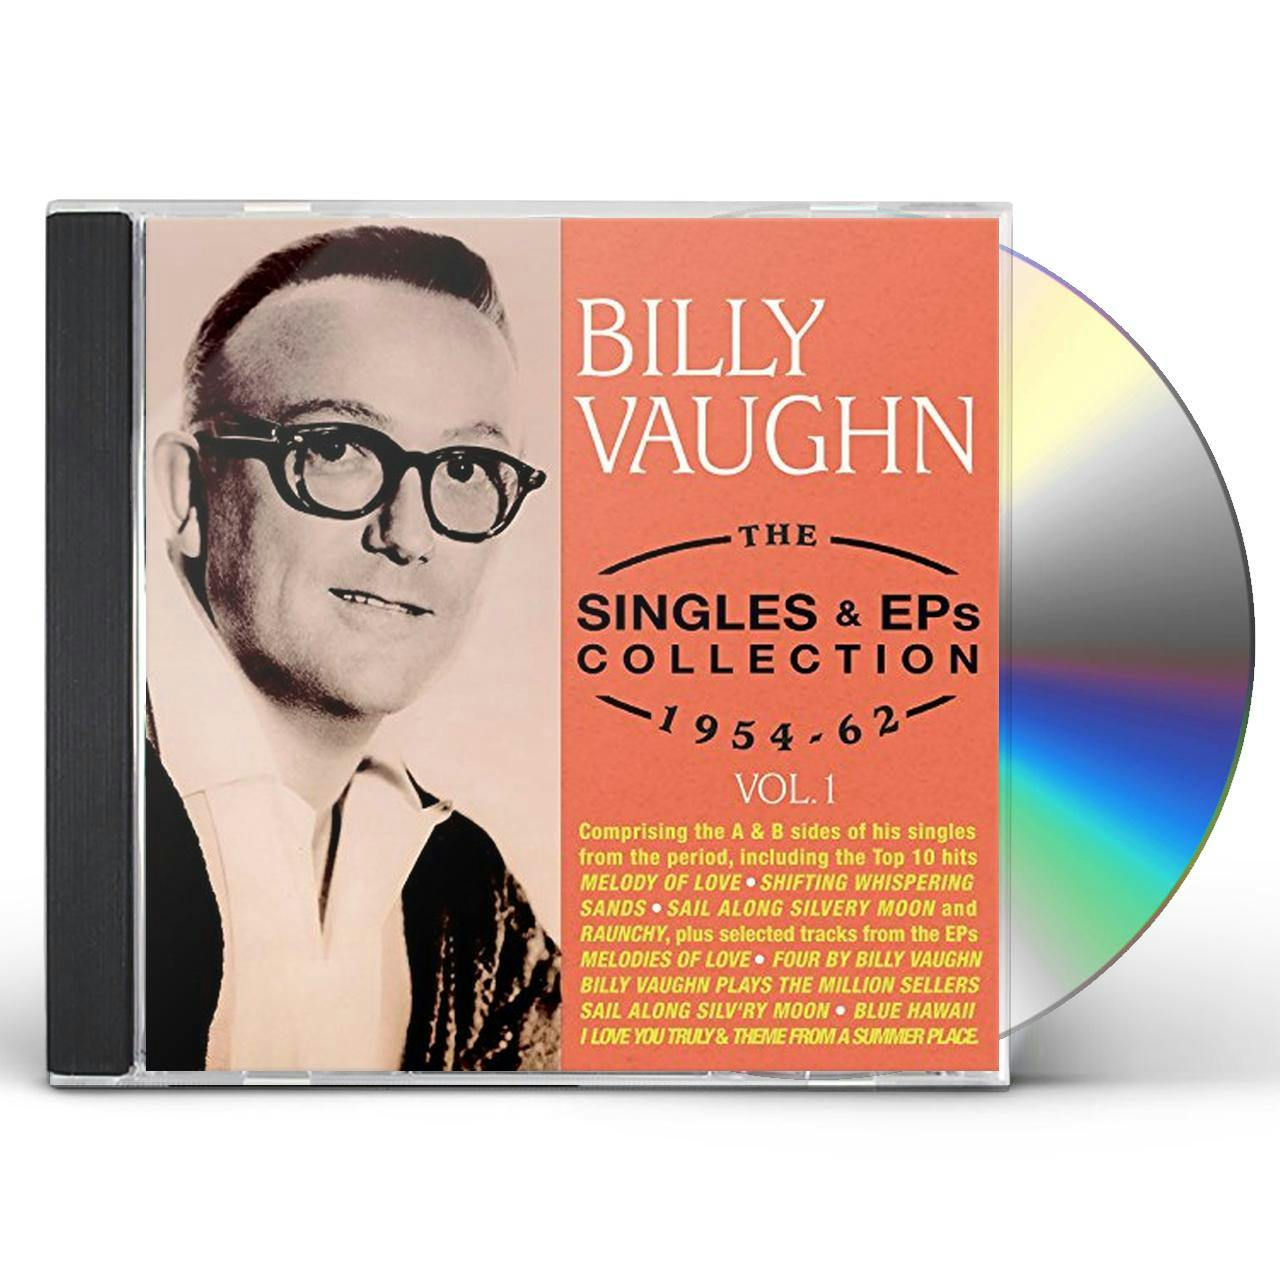 EPS　1954-62　COLLECTION　SINGLES　Vaughn　Billy　CD